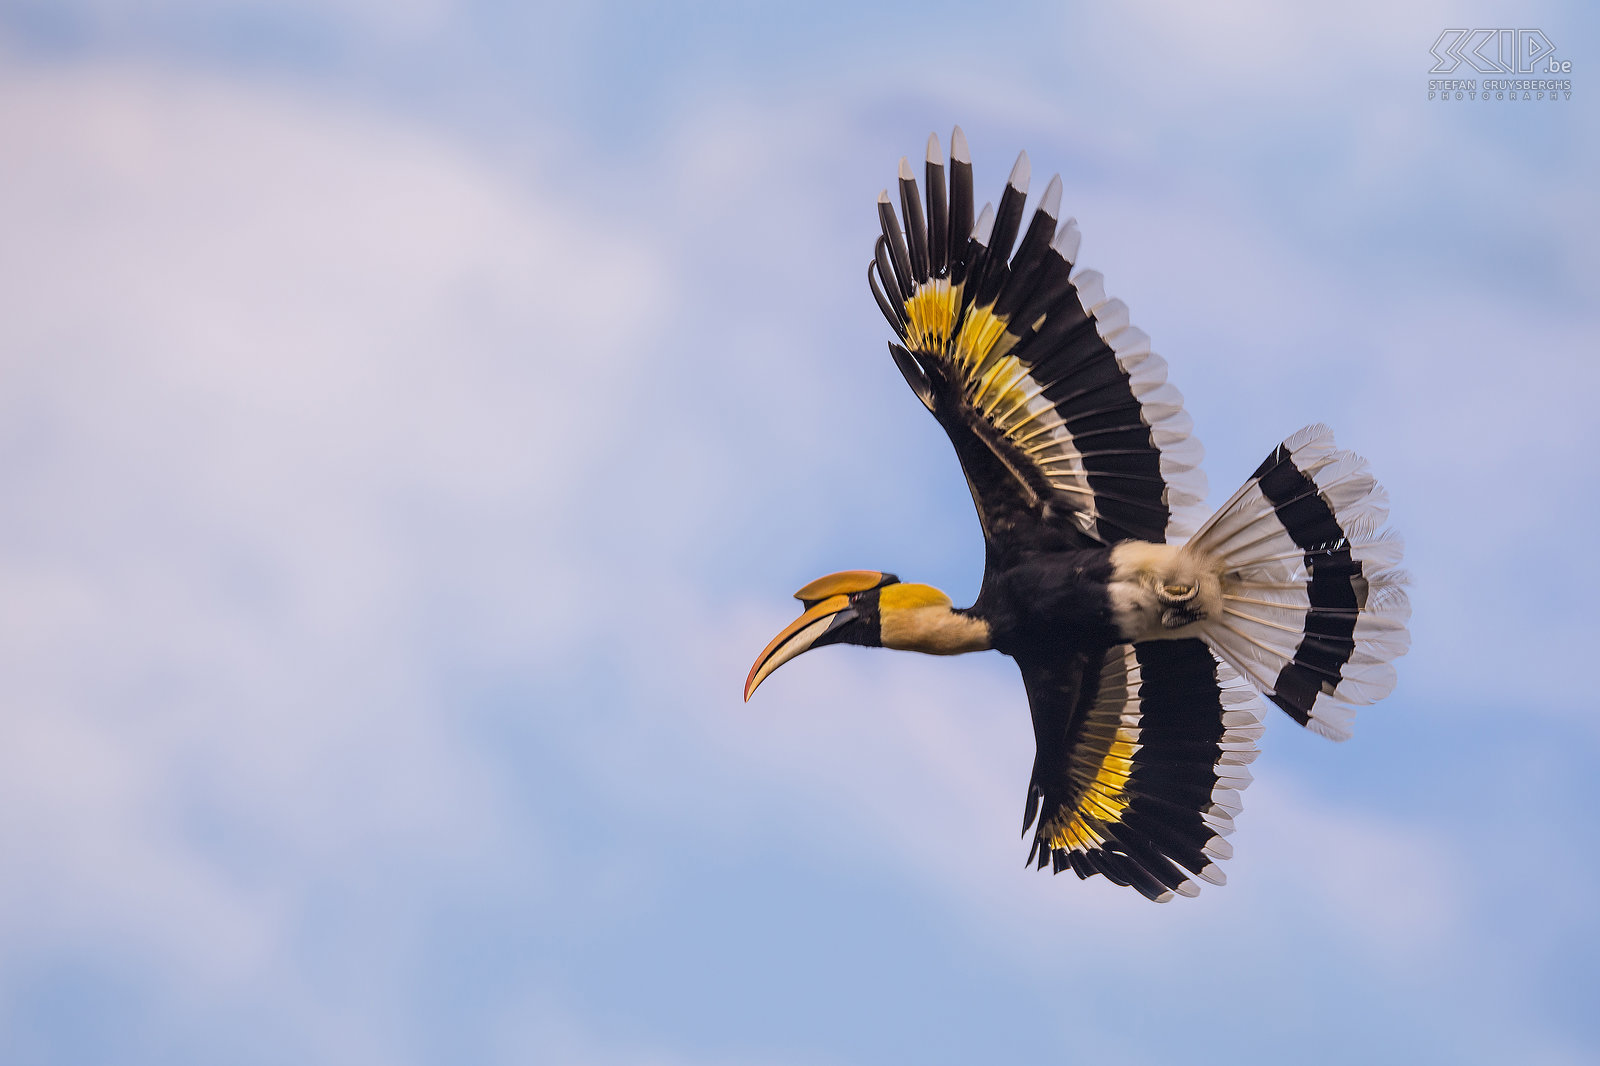 Valparai - Great Indian hornbill The Great Indian hornbill (Buceros bicornis) is the largest hornbill in south India. They can become 95–130cm long with a winspan of 150cm. It is very impressive to see these birds flying. Stefan Cruysberghs